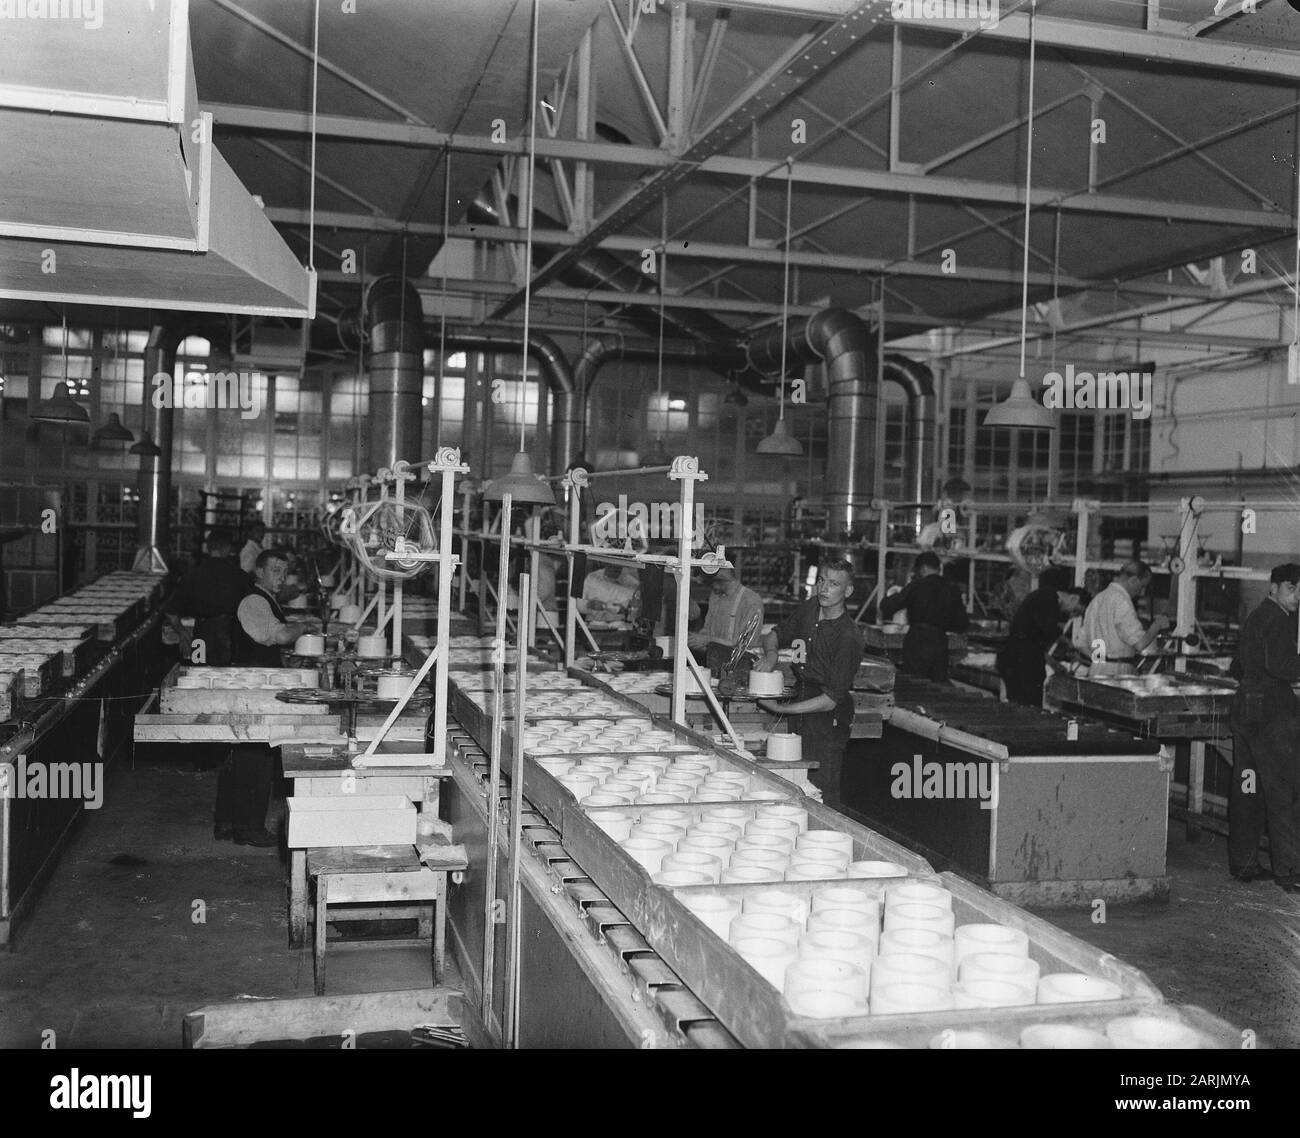 In the war-torn city of Arnhem, hard work is being done to build the art silk industry. This product so important for Dutch textile supply is manufactured here at the A.K.U. (Arnhemse Kunstzijde Union) Date: 28 May 1947 Location: Arnhem Keywords: industry, textile industry Stock Photo